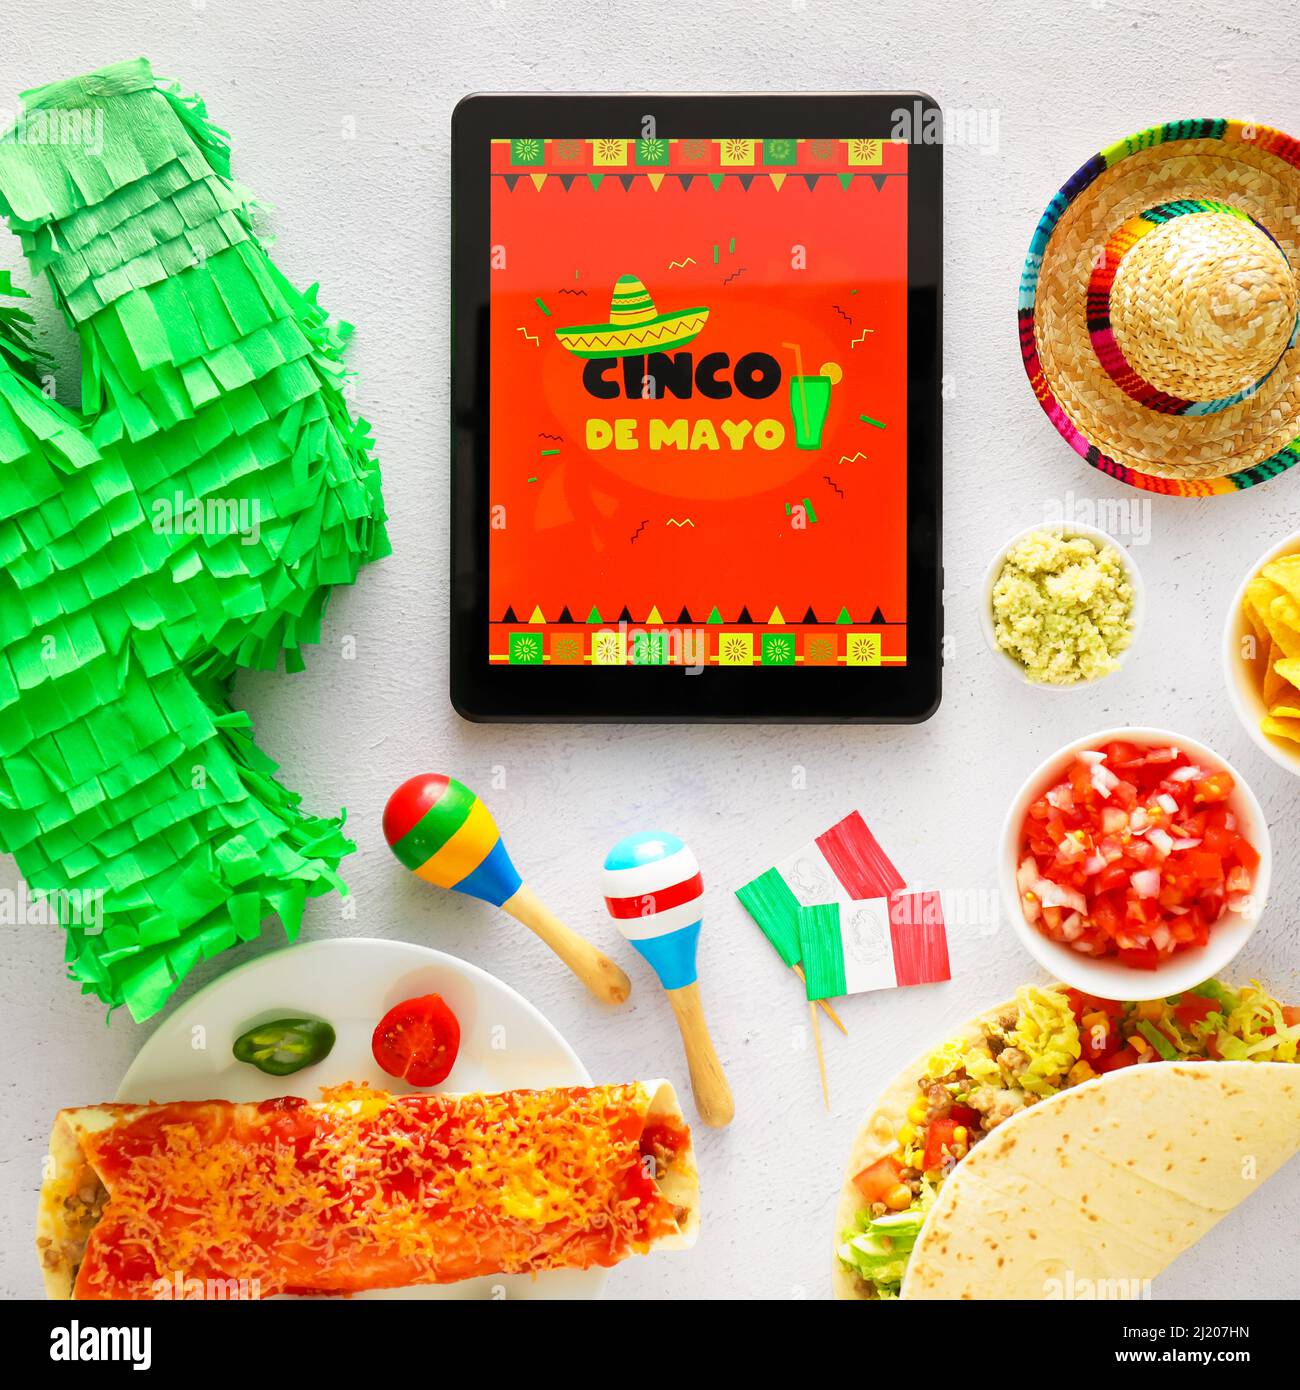 Kansen bord Terminal Traditional Mexican food with pinata, sombrero, maracas and tablet computer  on light background. Cinco de Mayo (Fifth of May) celebration Stock Photo -  Alamy